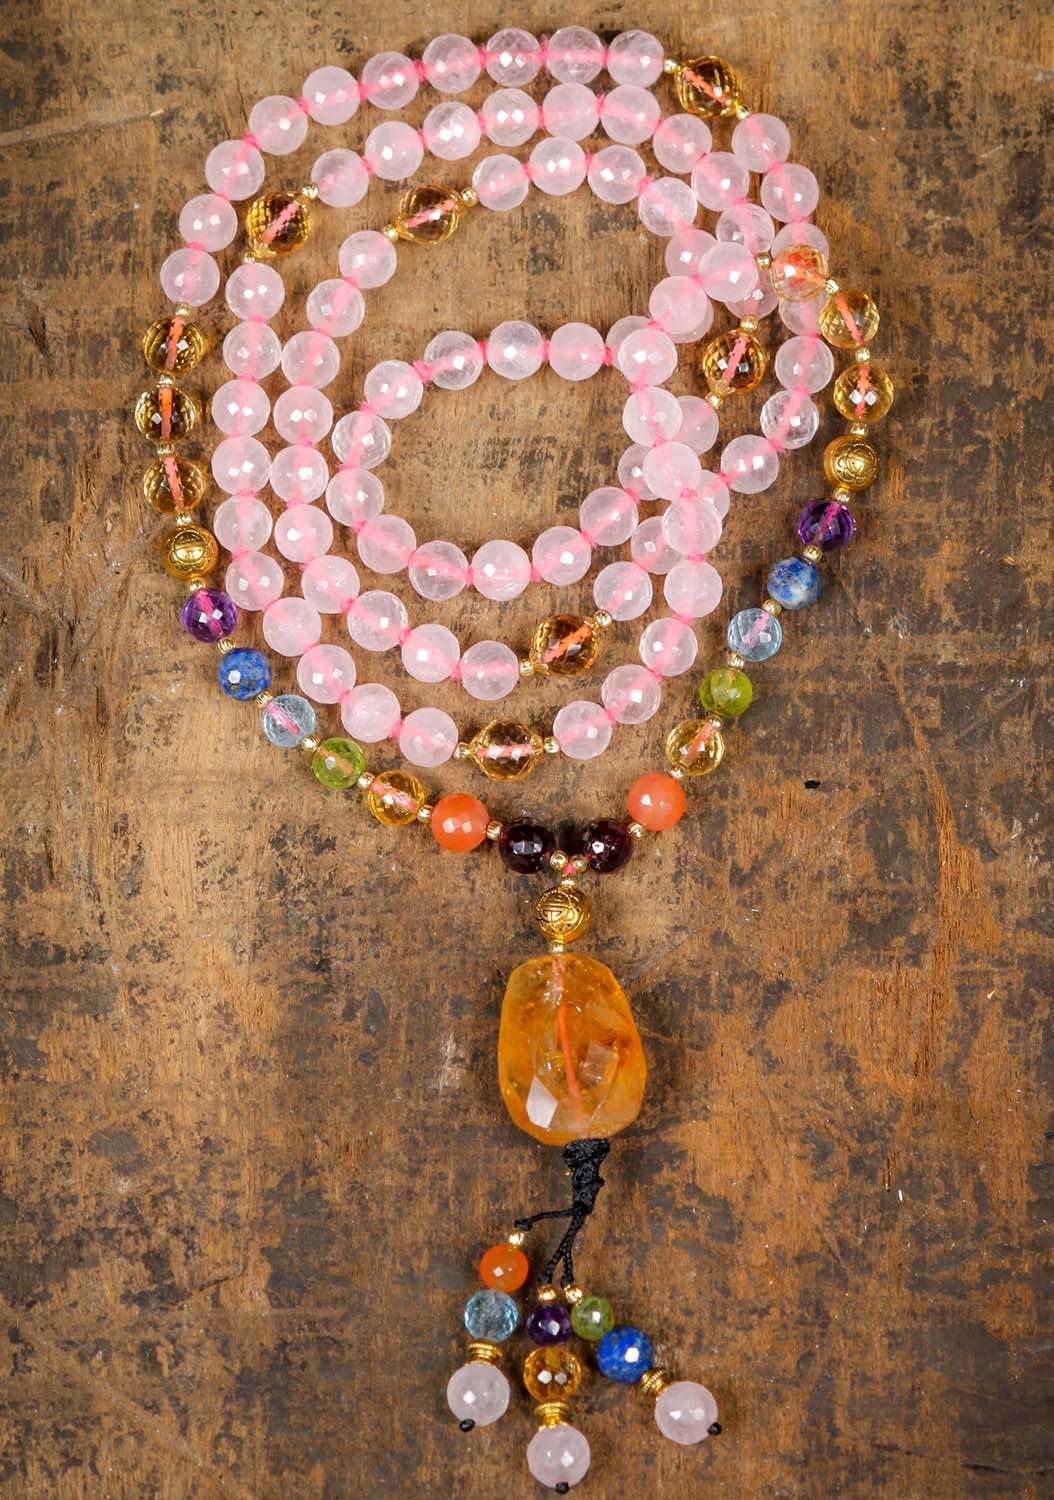 Rose Quartz Mala with 108 Beads, Seven Chakra Stones and Citrine Associated with Parvati 23"